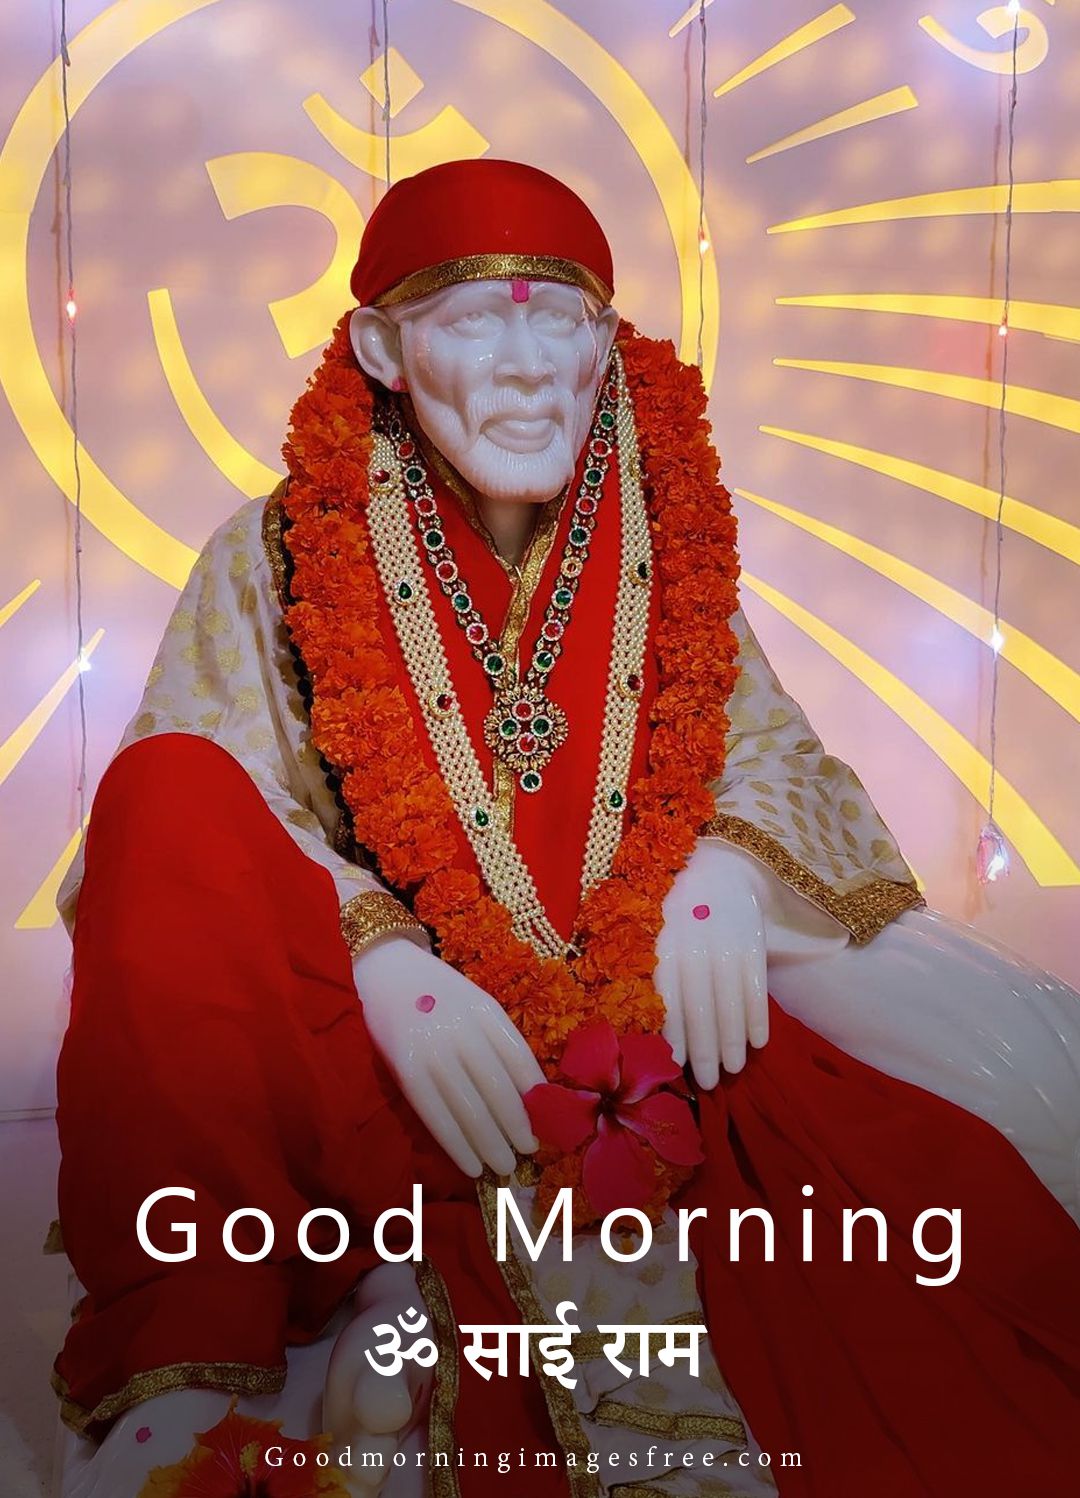 Sai Baba Good Morning Images Free Download in HD Quality